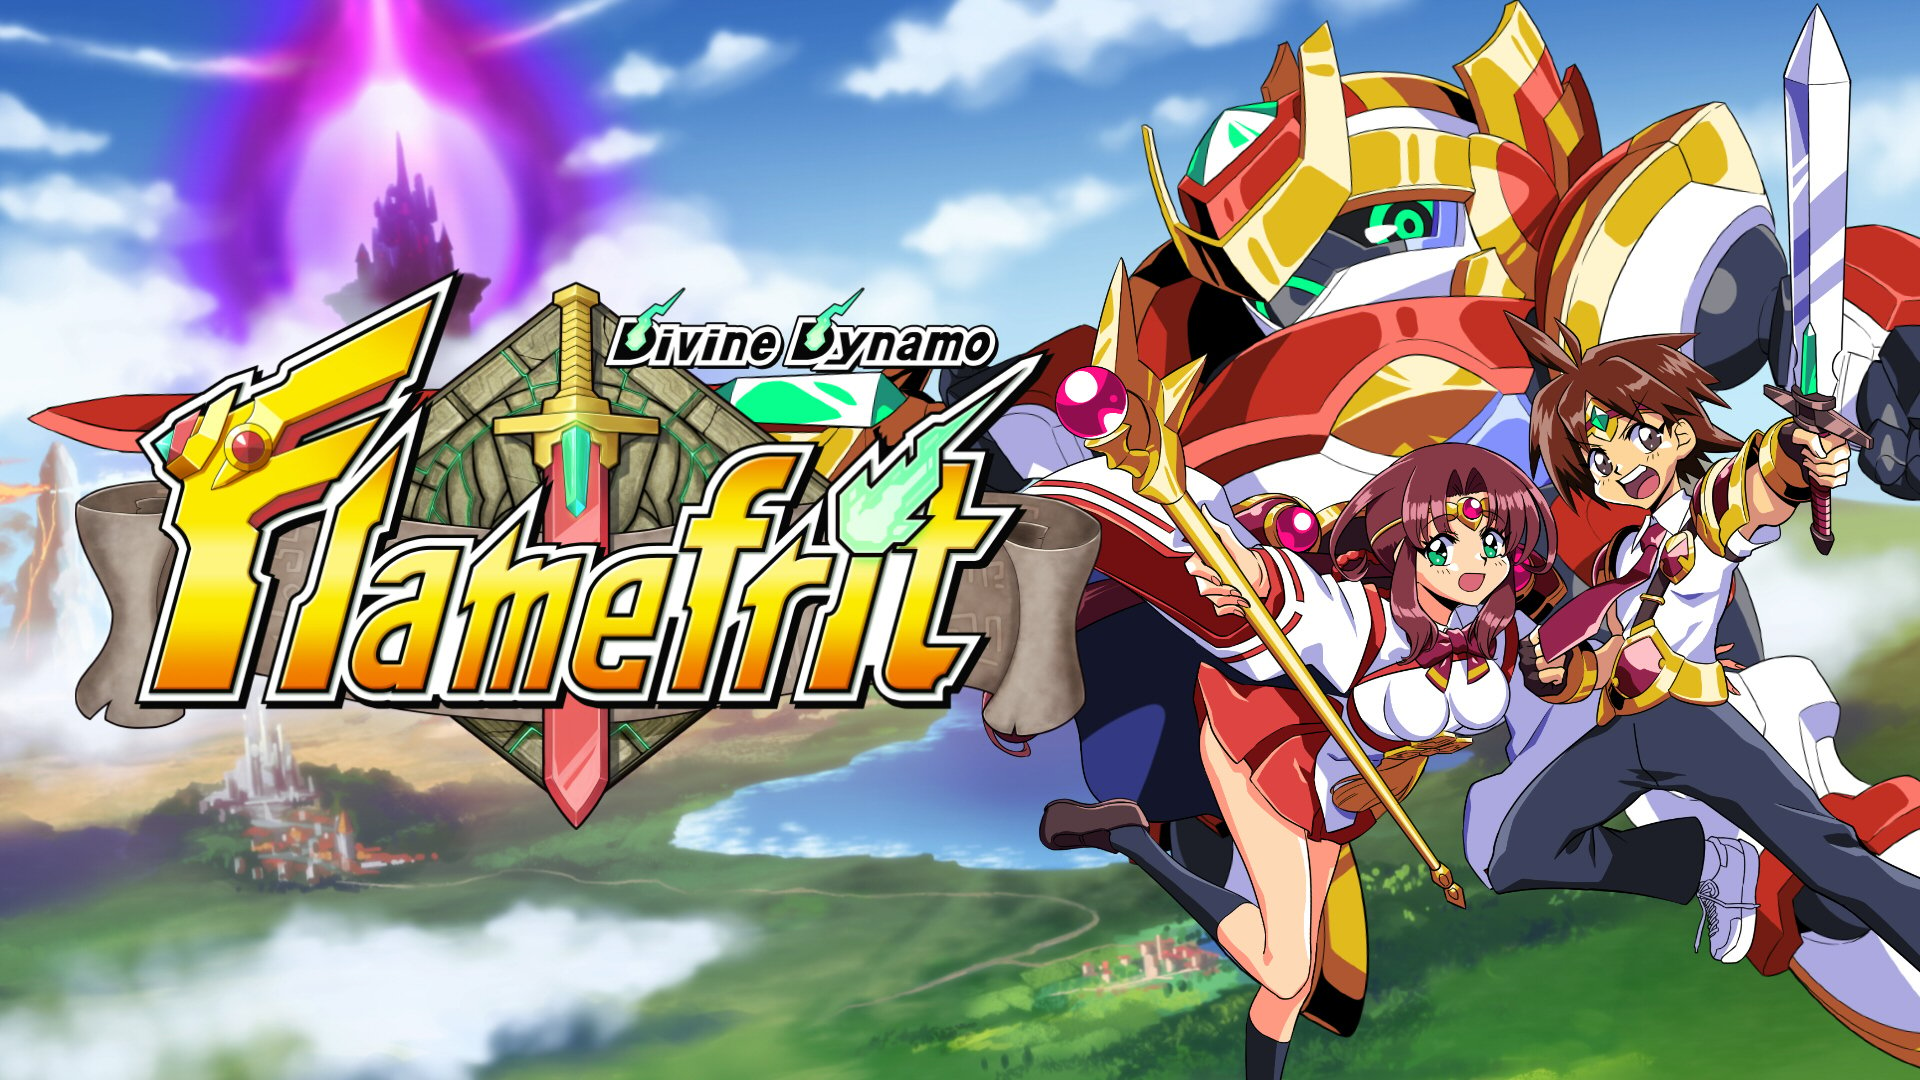 #
      Inti Creates announces fantasy robot anime-inspired 2D action game Divine Dynamo Flamefrit